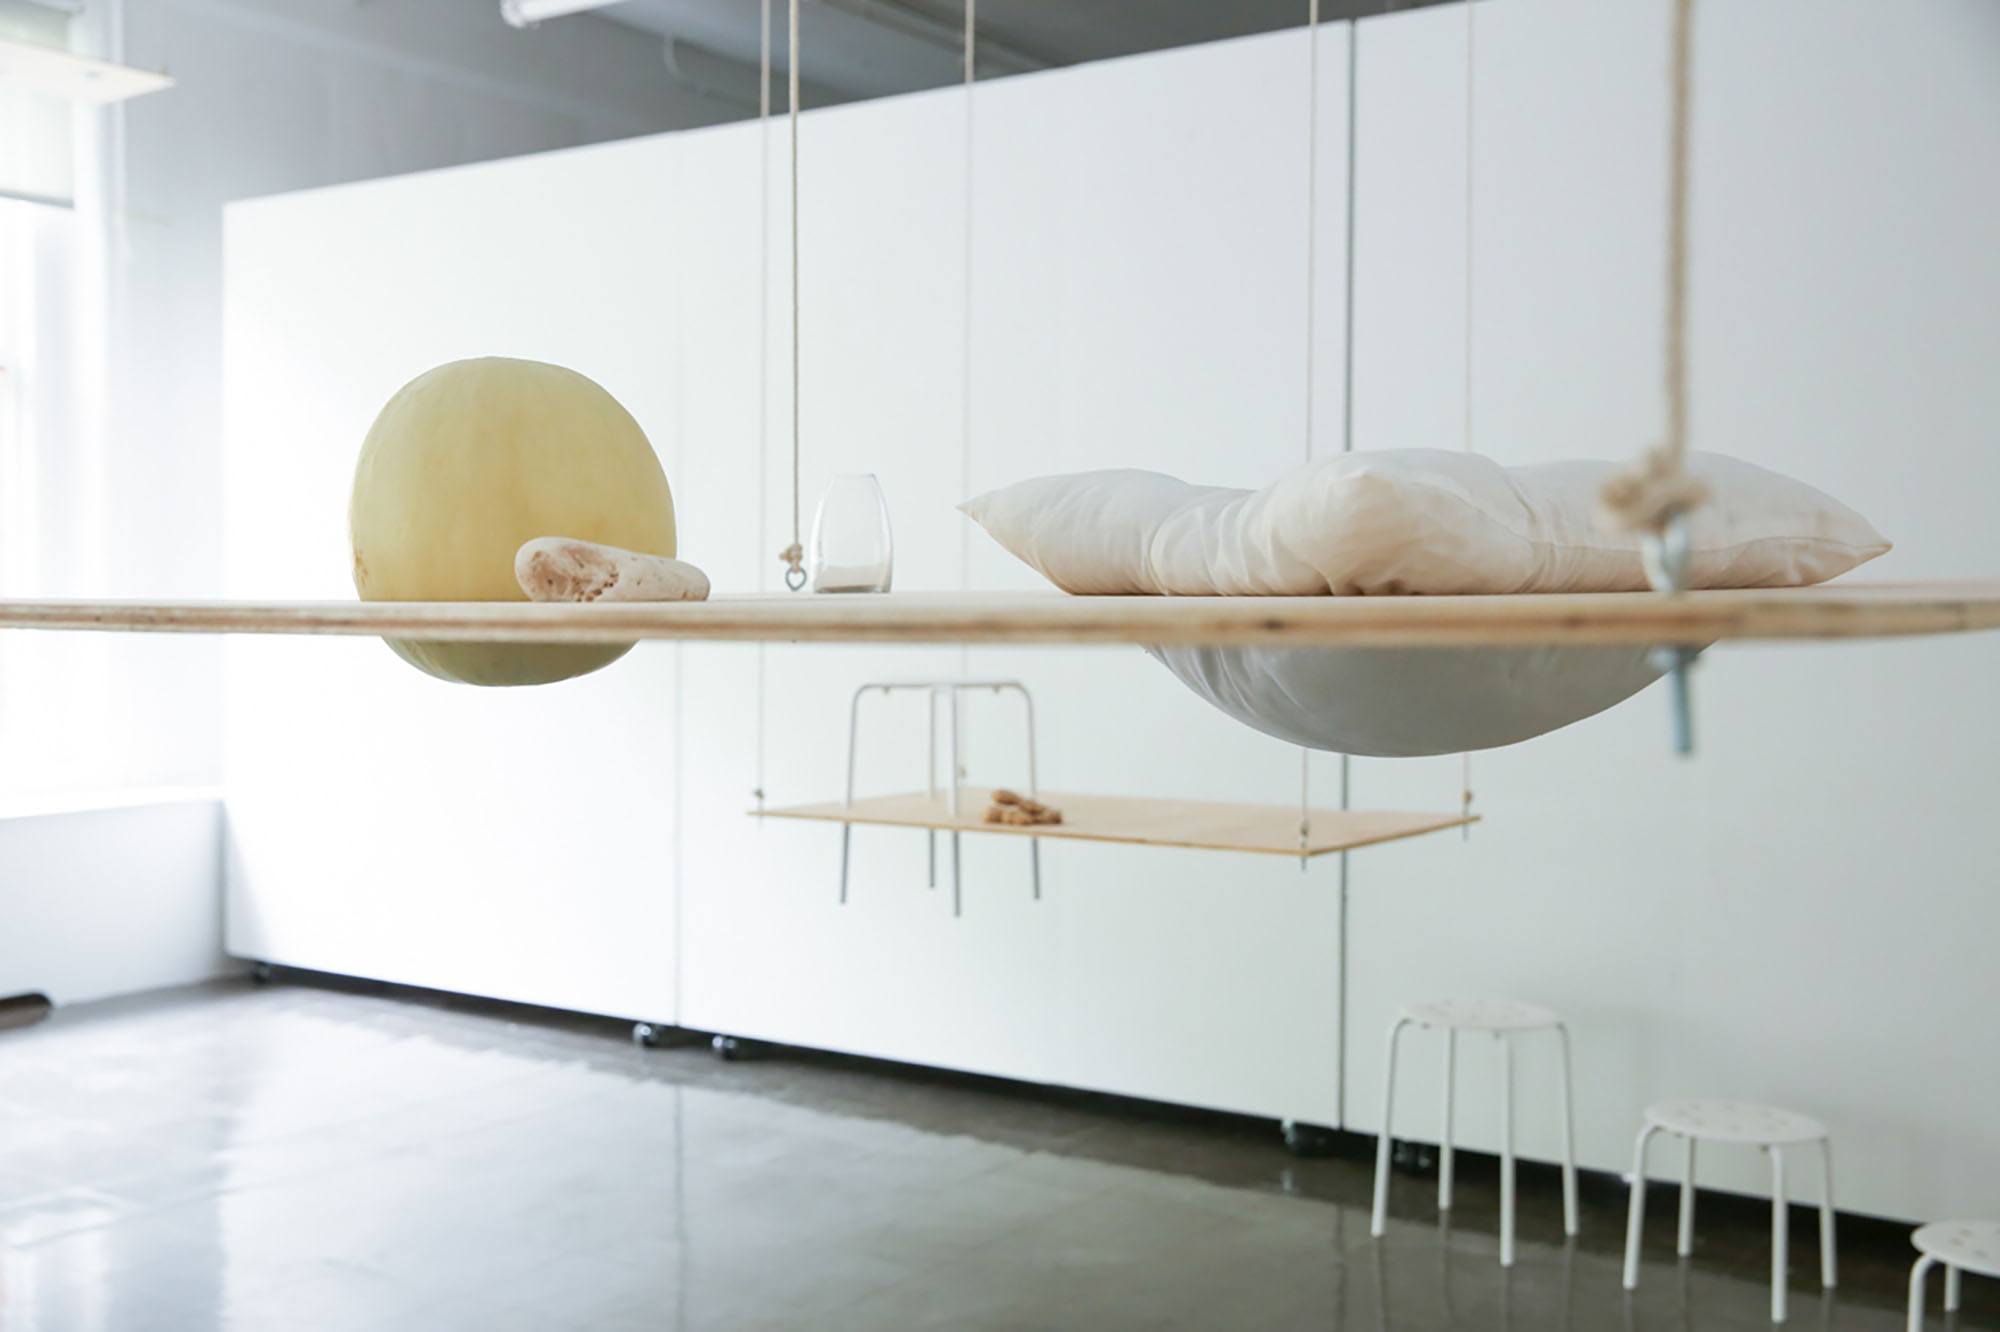 Suspended sheets of plywood with hard and soft objects resting in holes cut in the wood